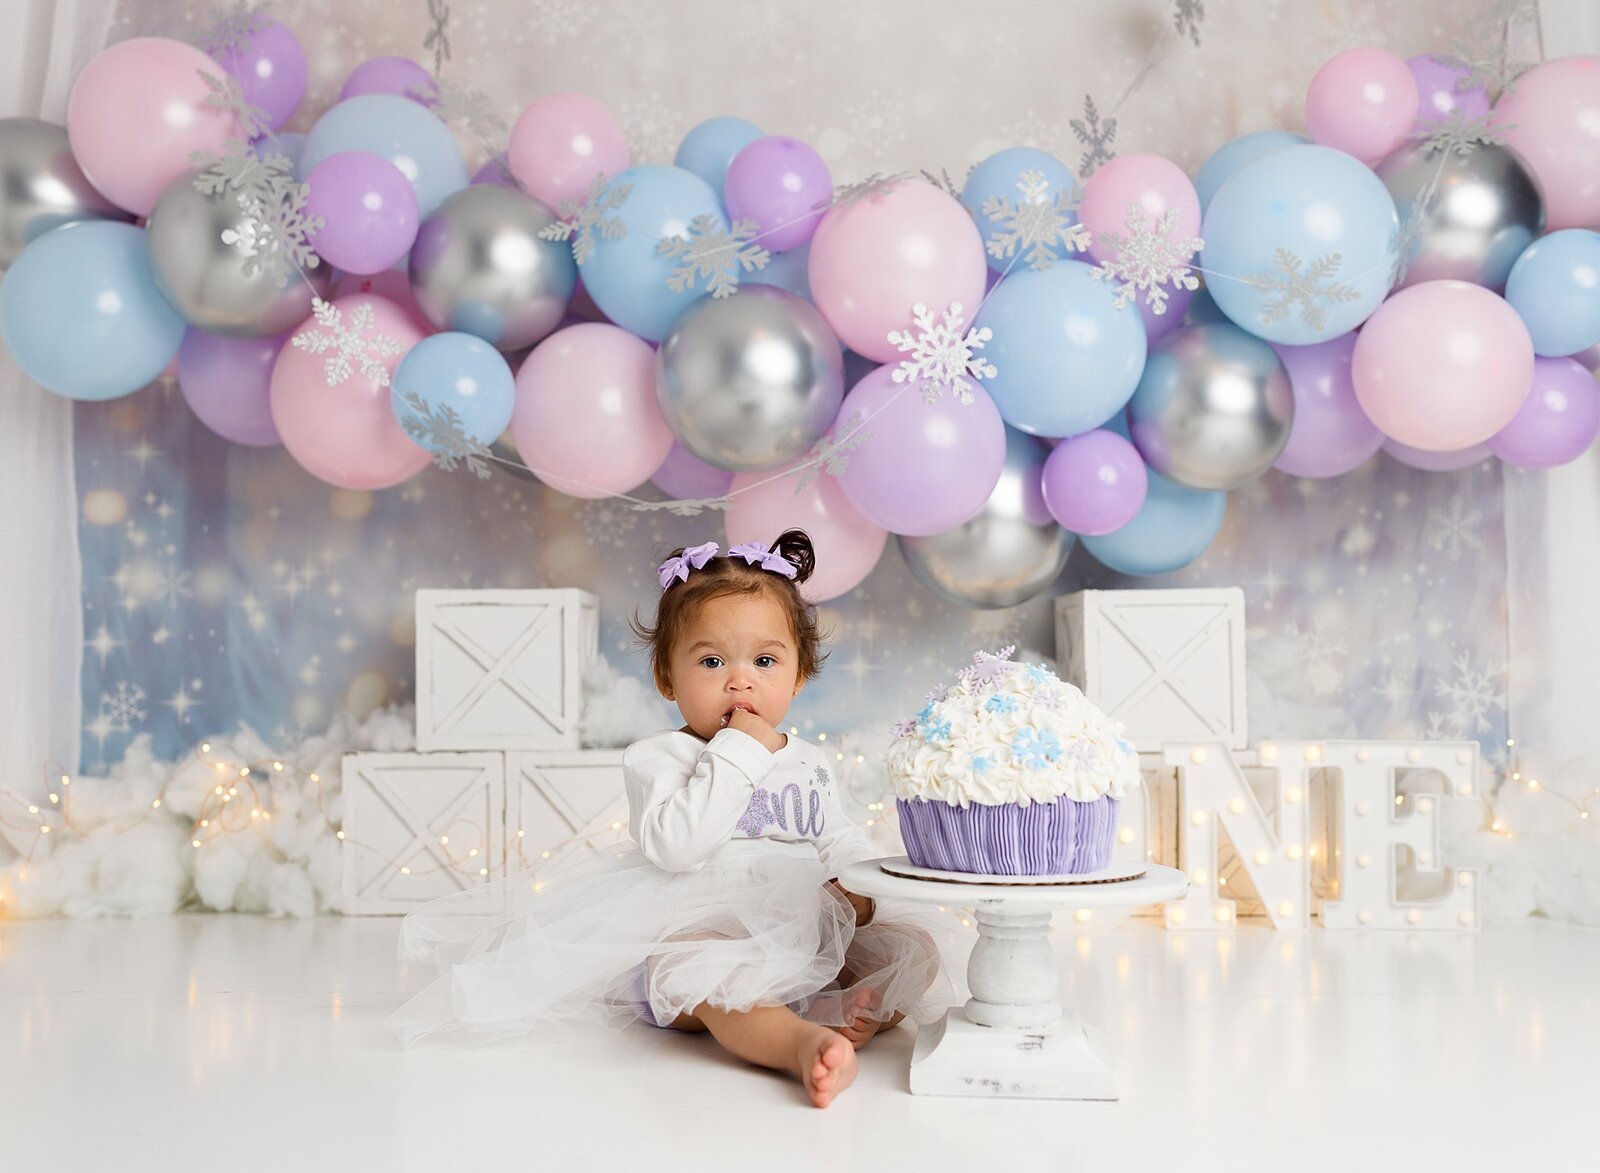 Little girl eating cake with a pastel themed backdrop